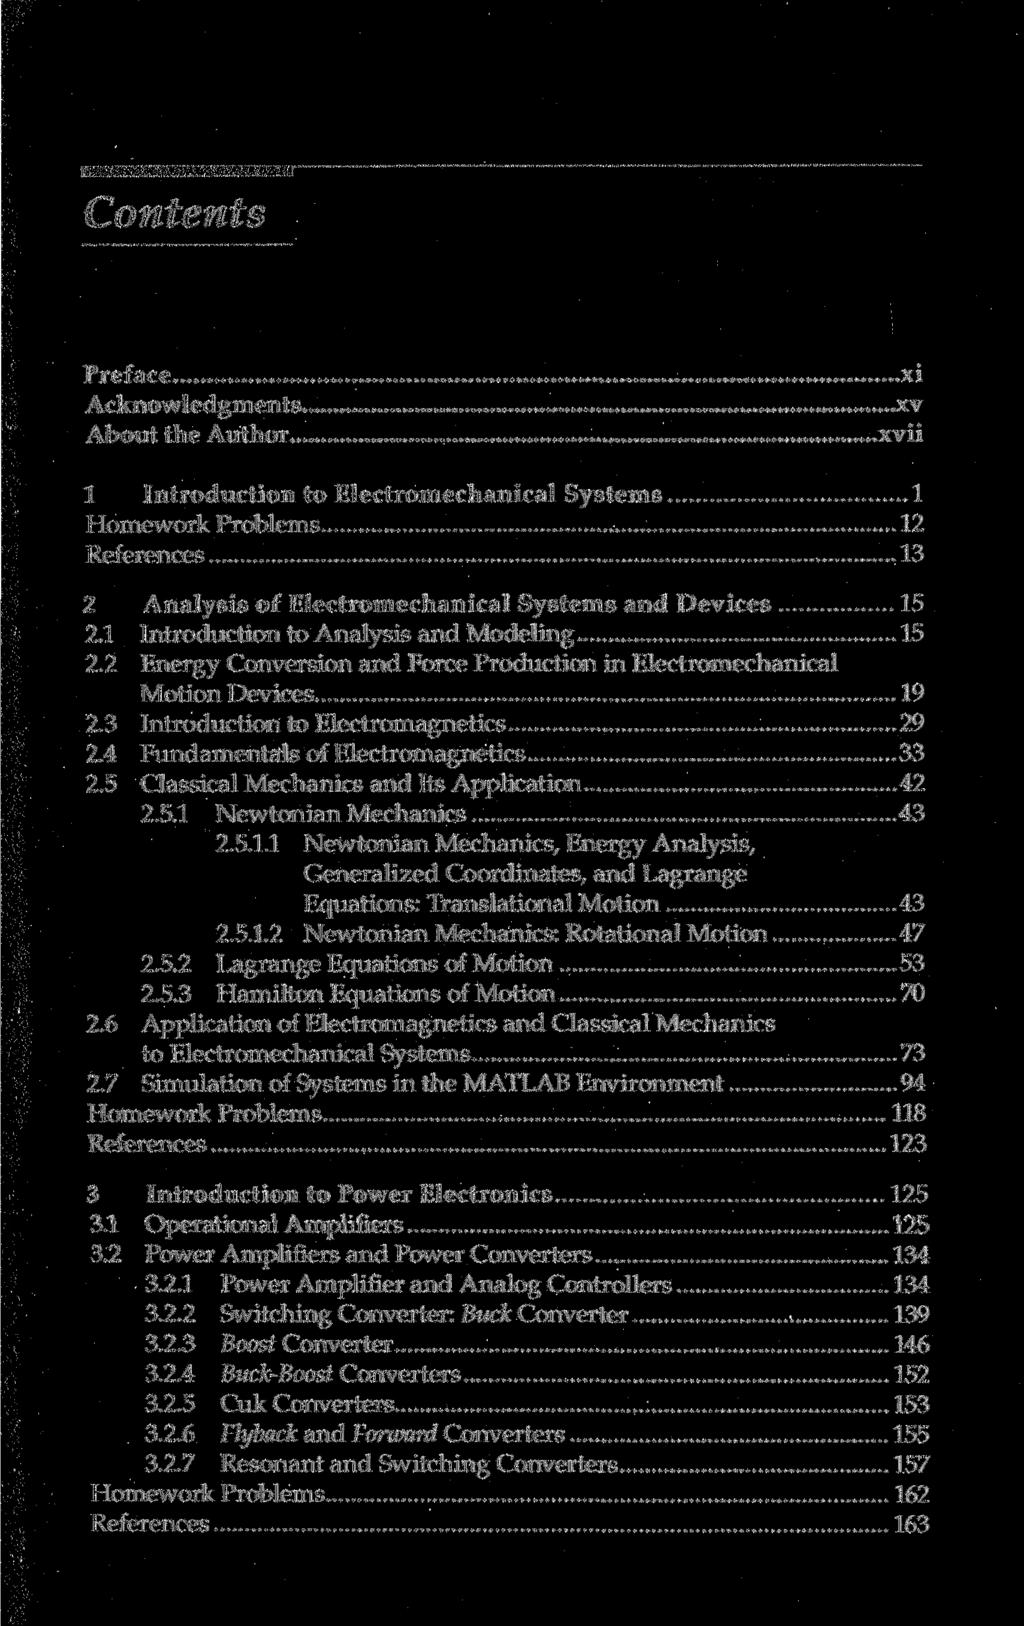 Contents Preface Acknowledgments About the Author xi xv xvii 1 Introduction to Electromechanical Systems 1 Homework Problems 12 References 13 2 Analysis of Electromechanical Systems and Devices 15 2.